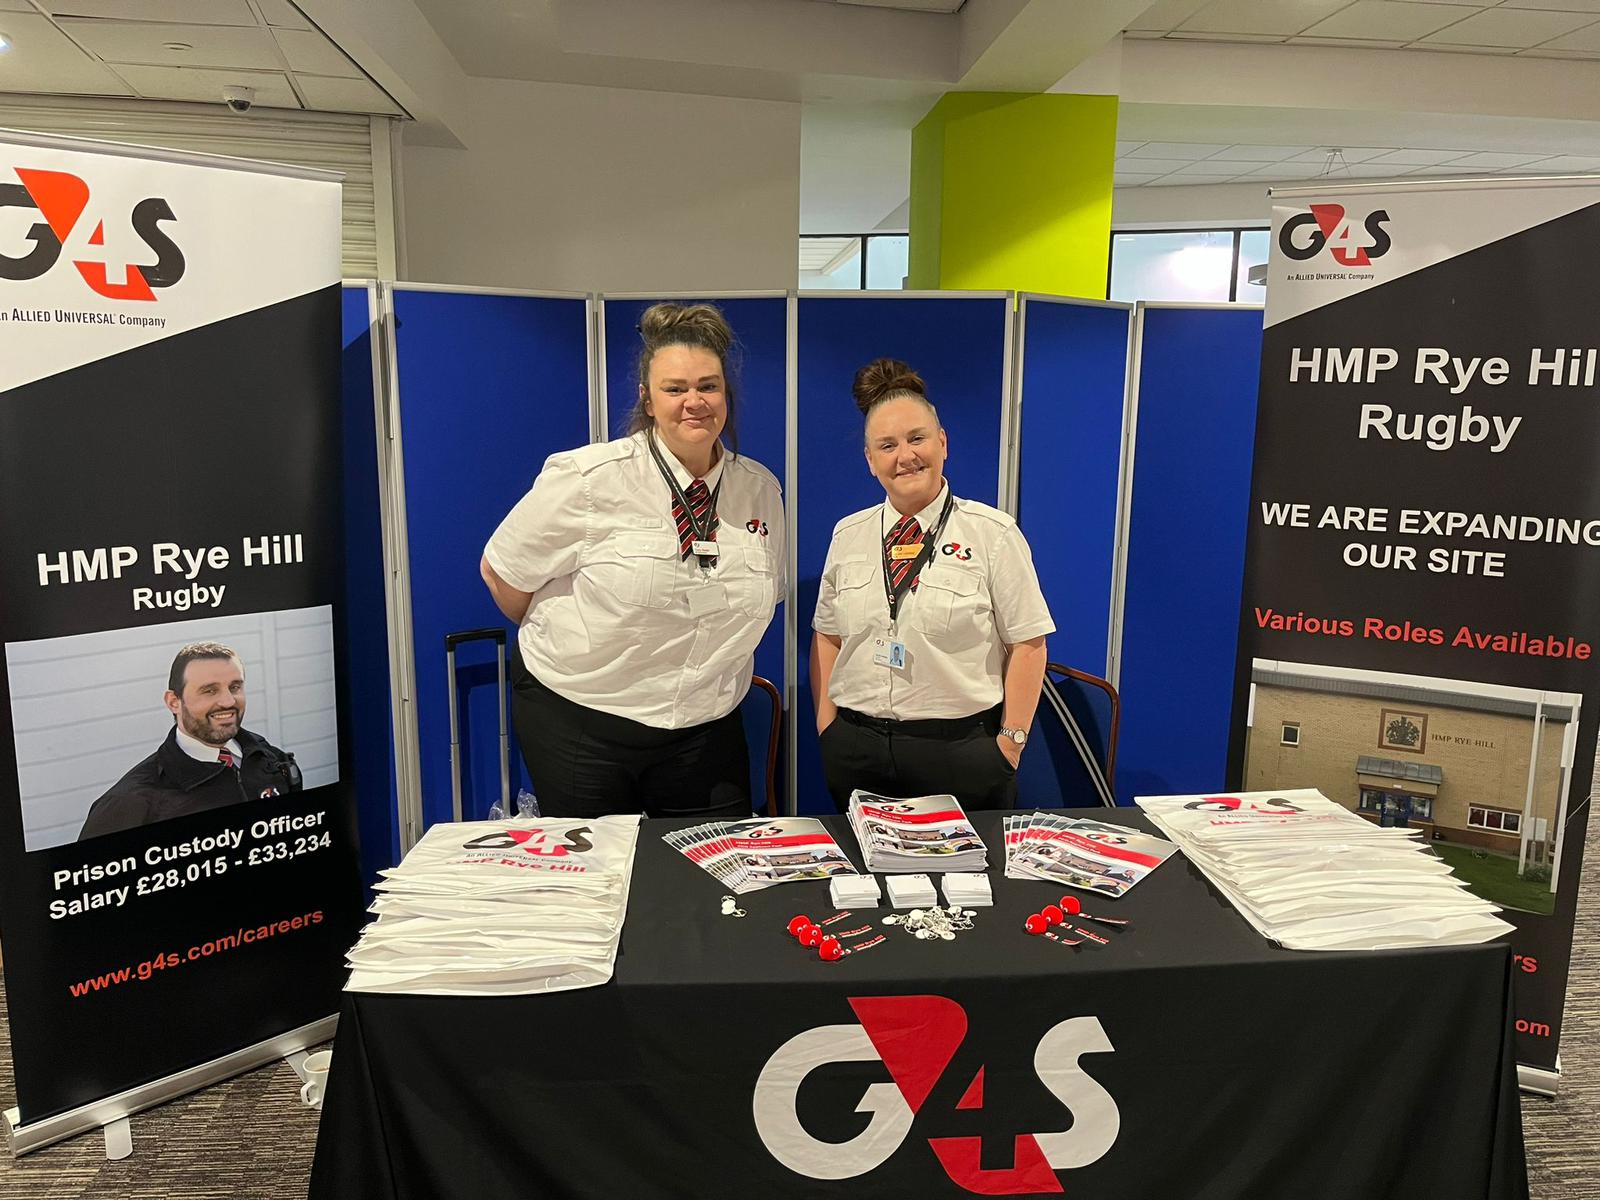 G4S at our event in Coventry